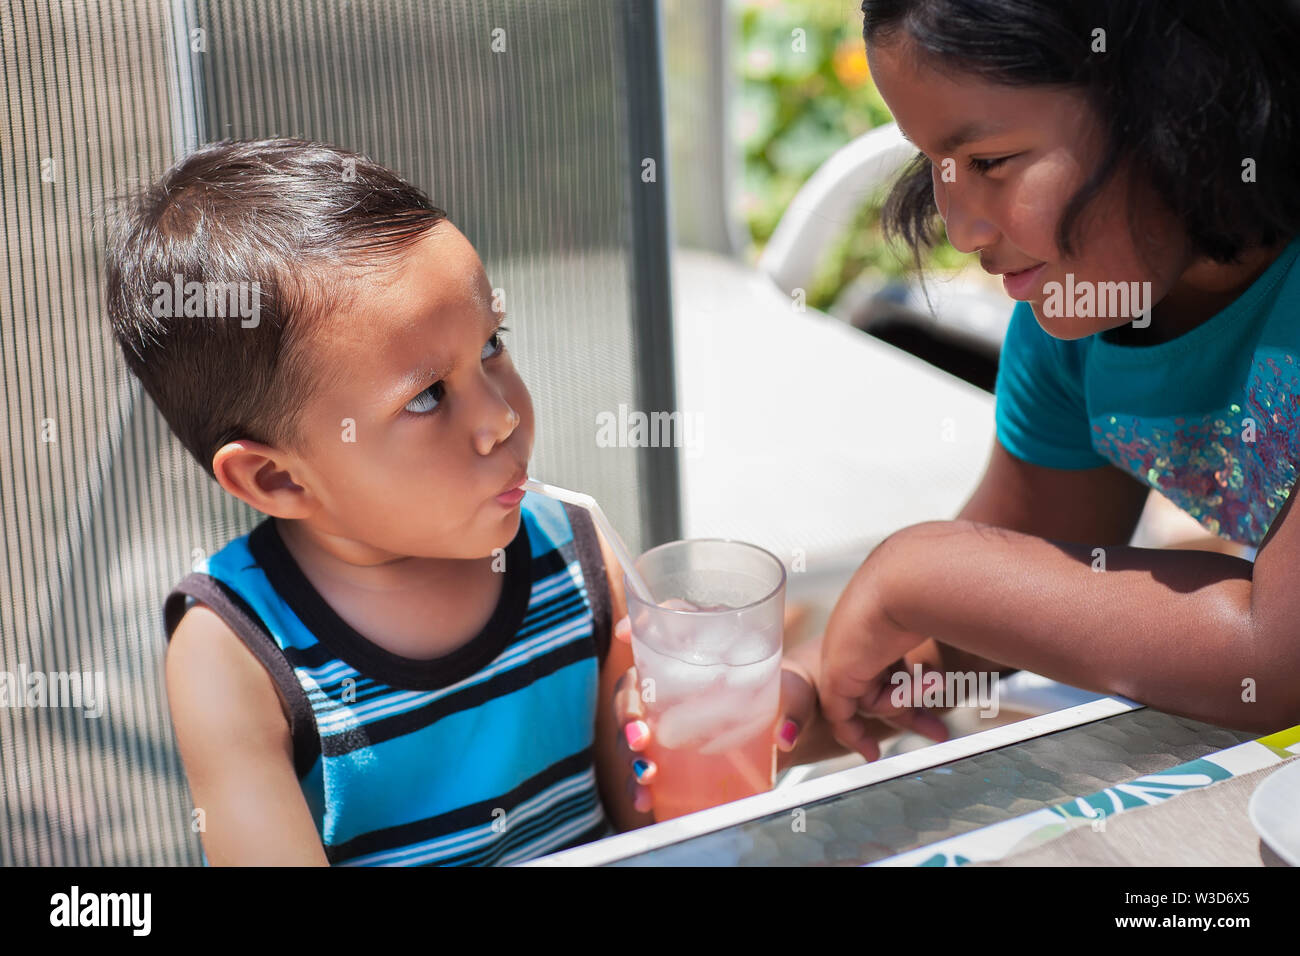 Big sister is holding a pink lemonade drink for his little brother to drink from a straw during summertime. Stock Photo